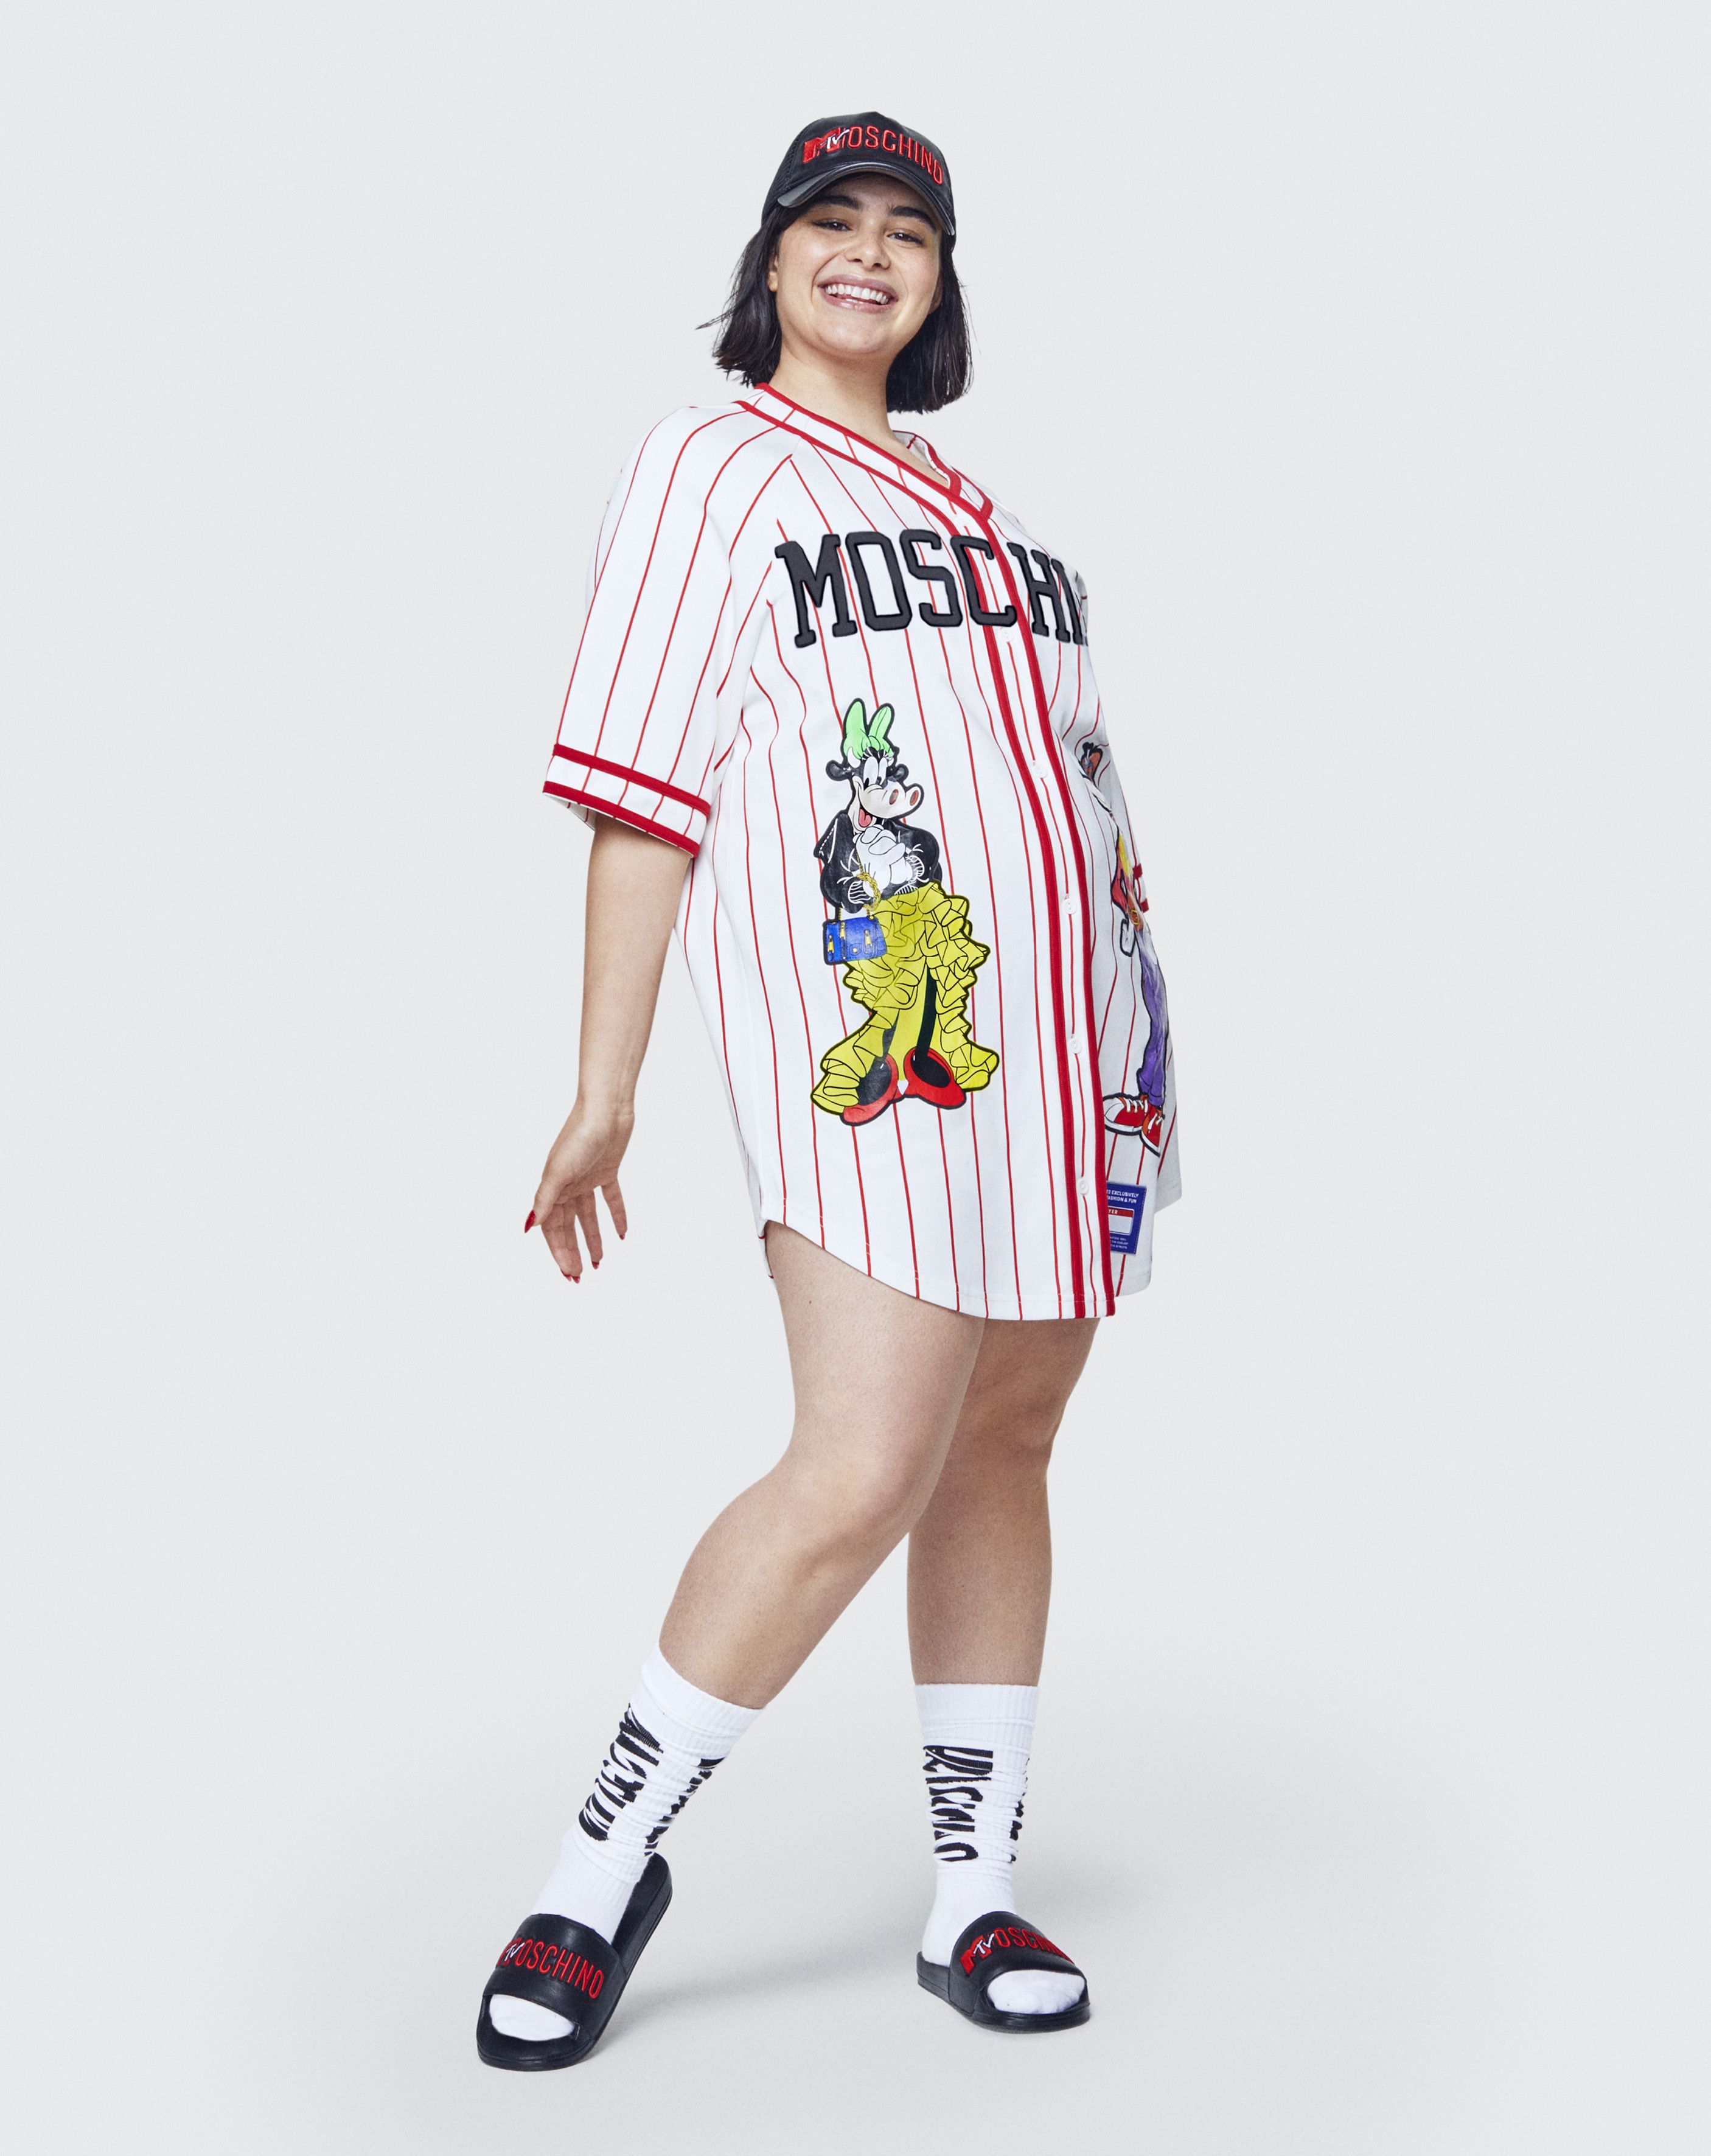 See Every Look in the Moschino x H&M Collection